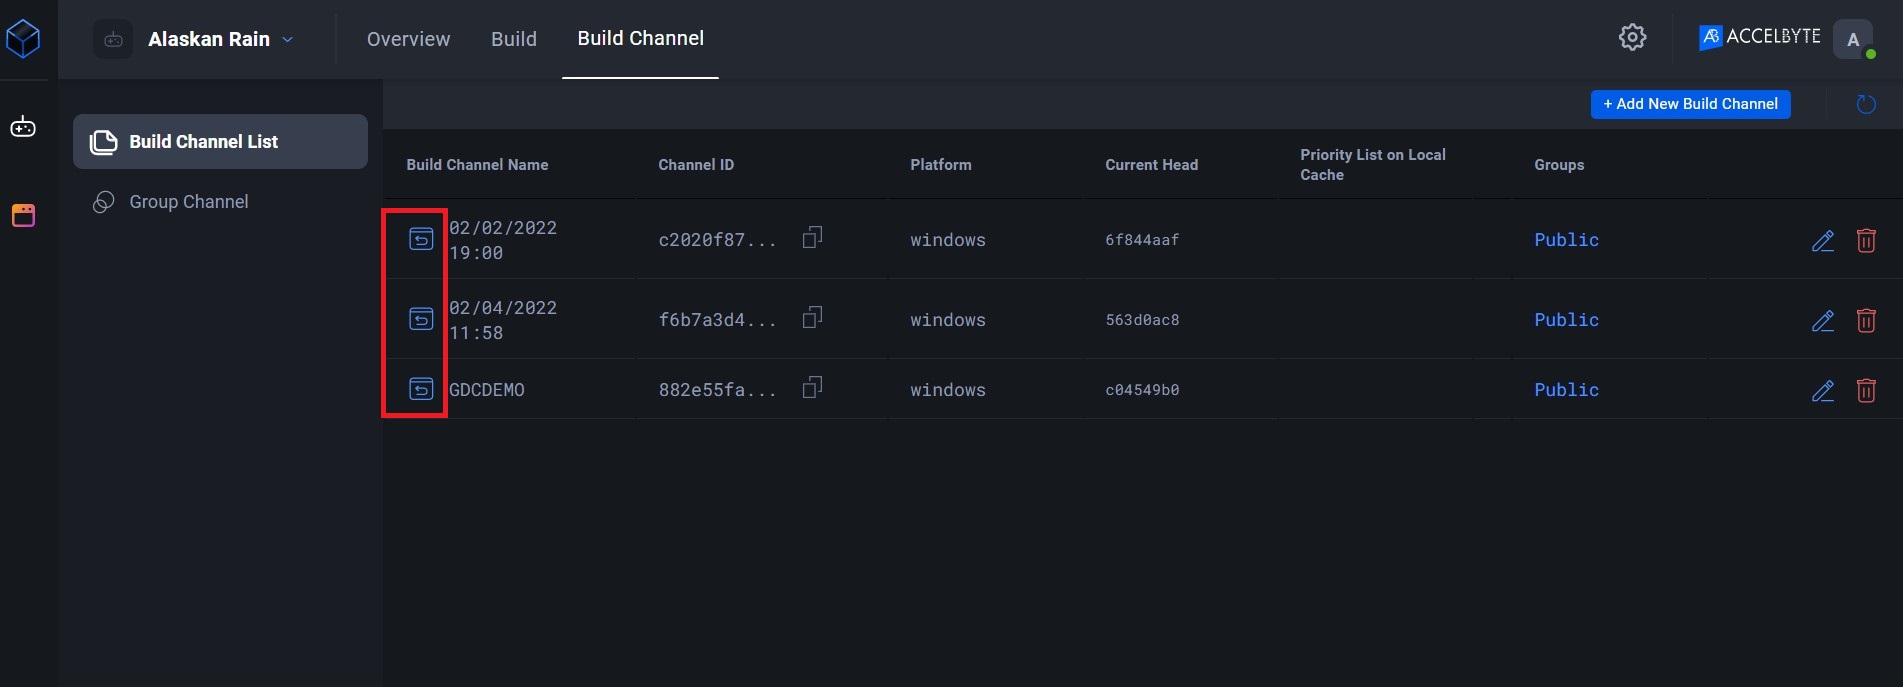 Build channel history